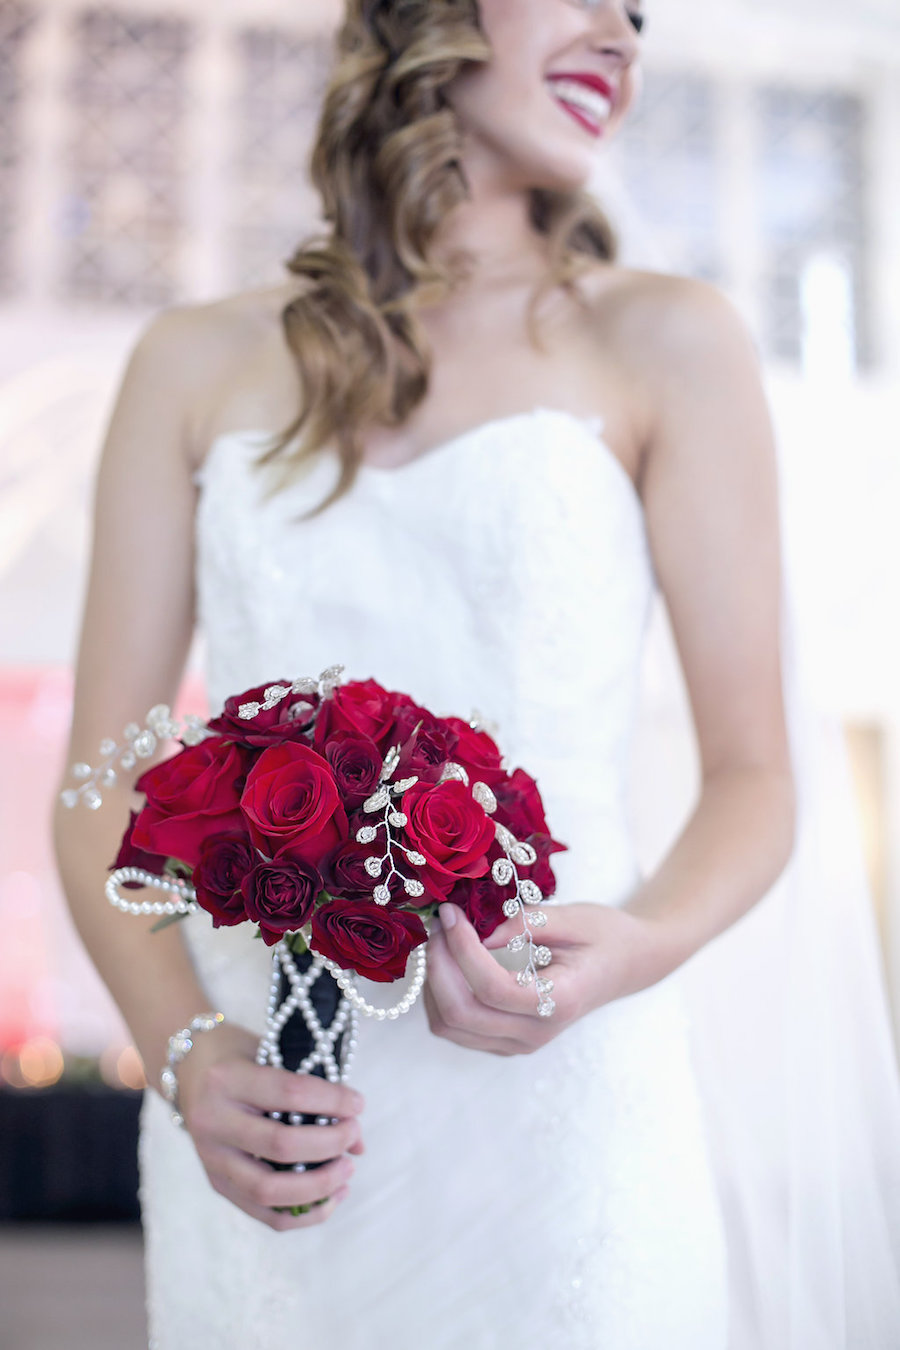 Bridal Portrait in White, Strapless Wedding Gown and Deep Red Rose Wedding Bouquet | Tampa Wedding Florist Apple Blossoms Floral Design | Tampa Wedding Photographer FotoBohemia